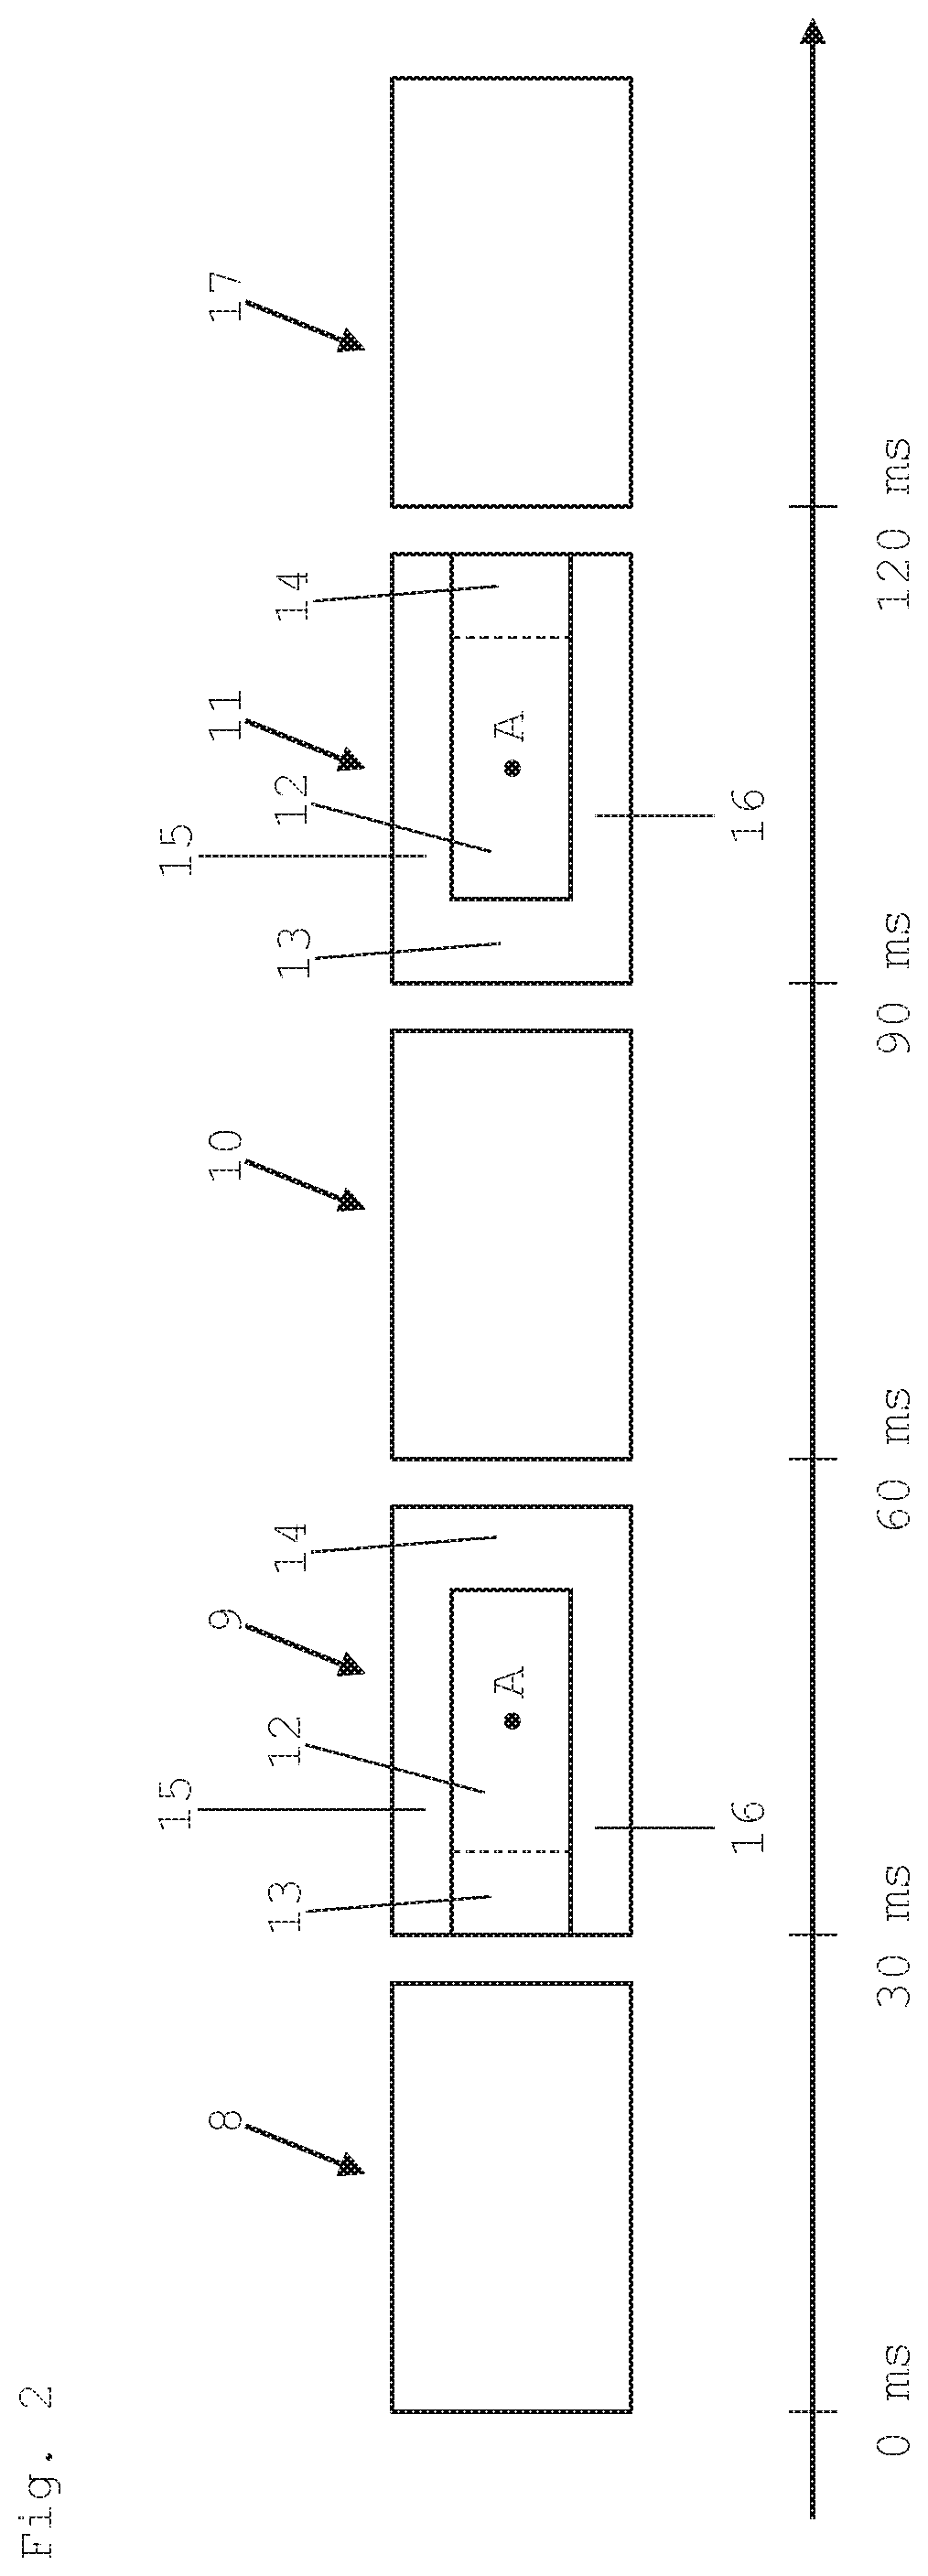 Camera device and method for detecting a surrounding region of a vehicle